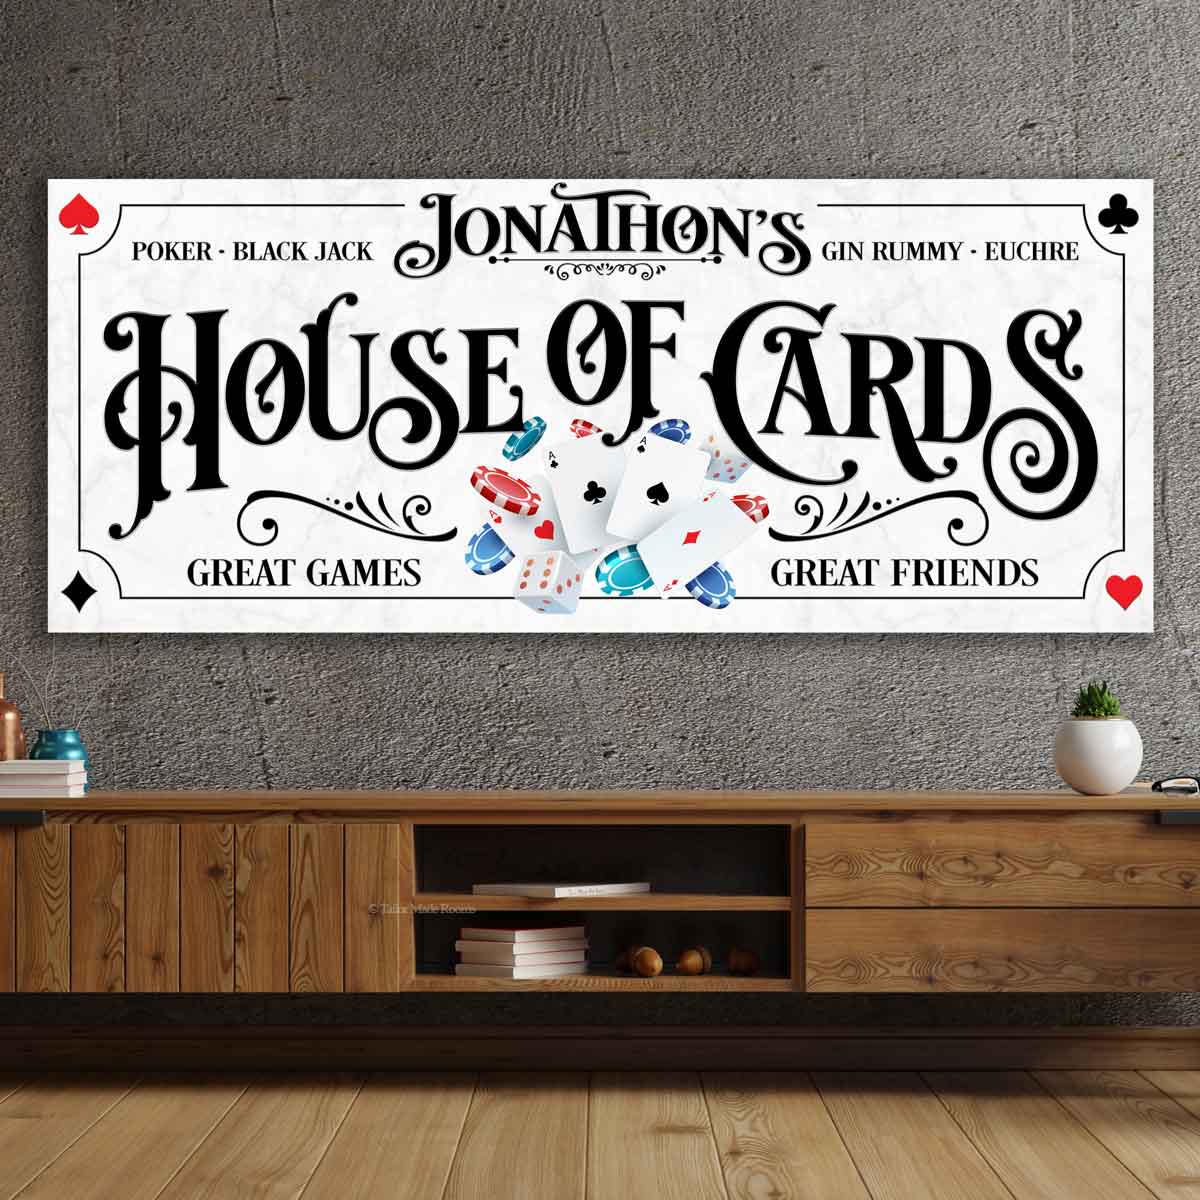  Poker room decor of white marble sign with black wording that says; [family name] House of cards, great games great friends.